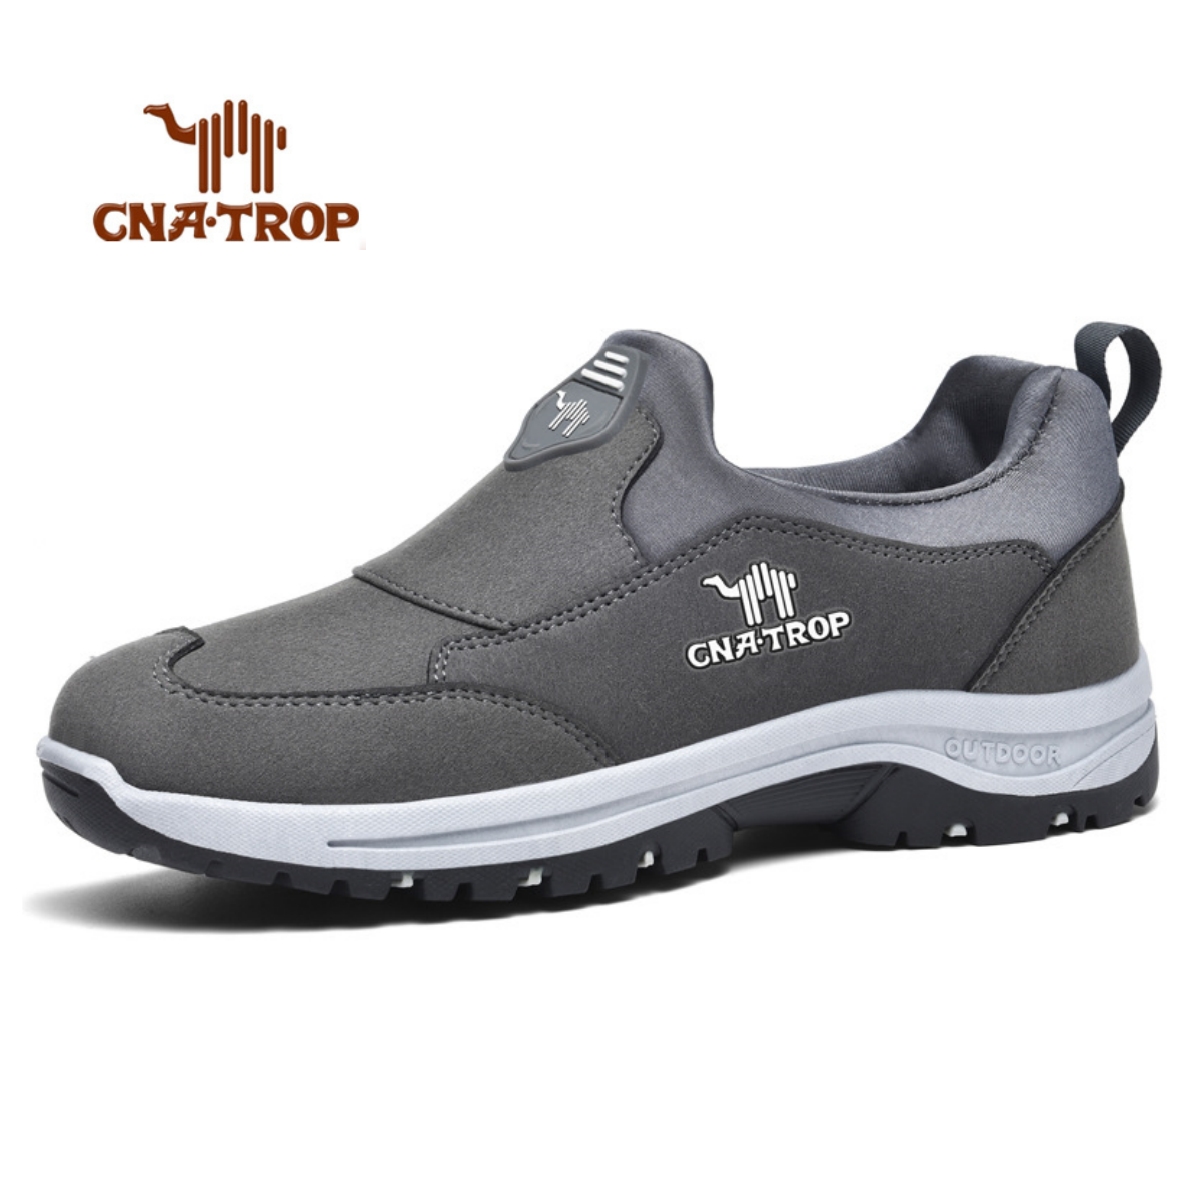 Lightweight and comfortable slip-on soft-soled casual shoes for outdoo